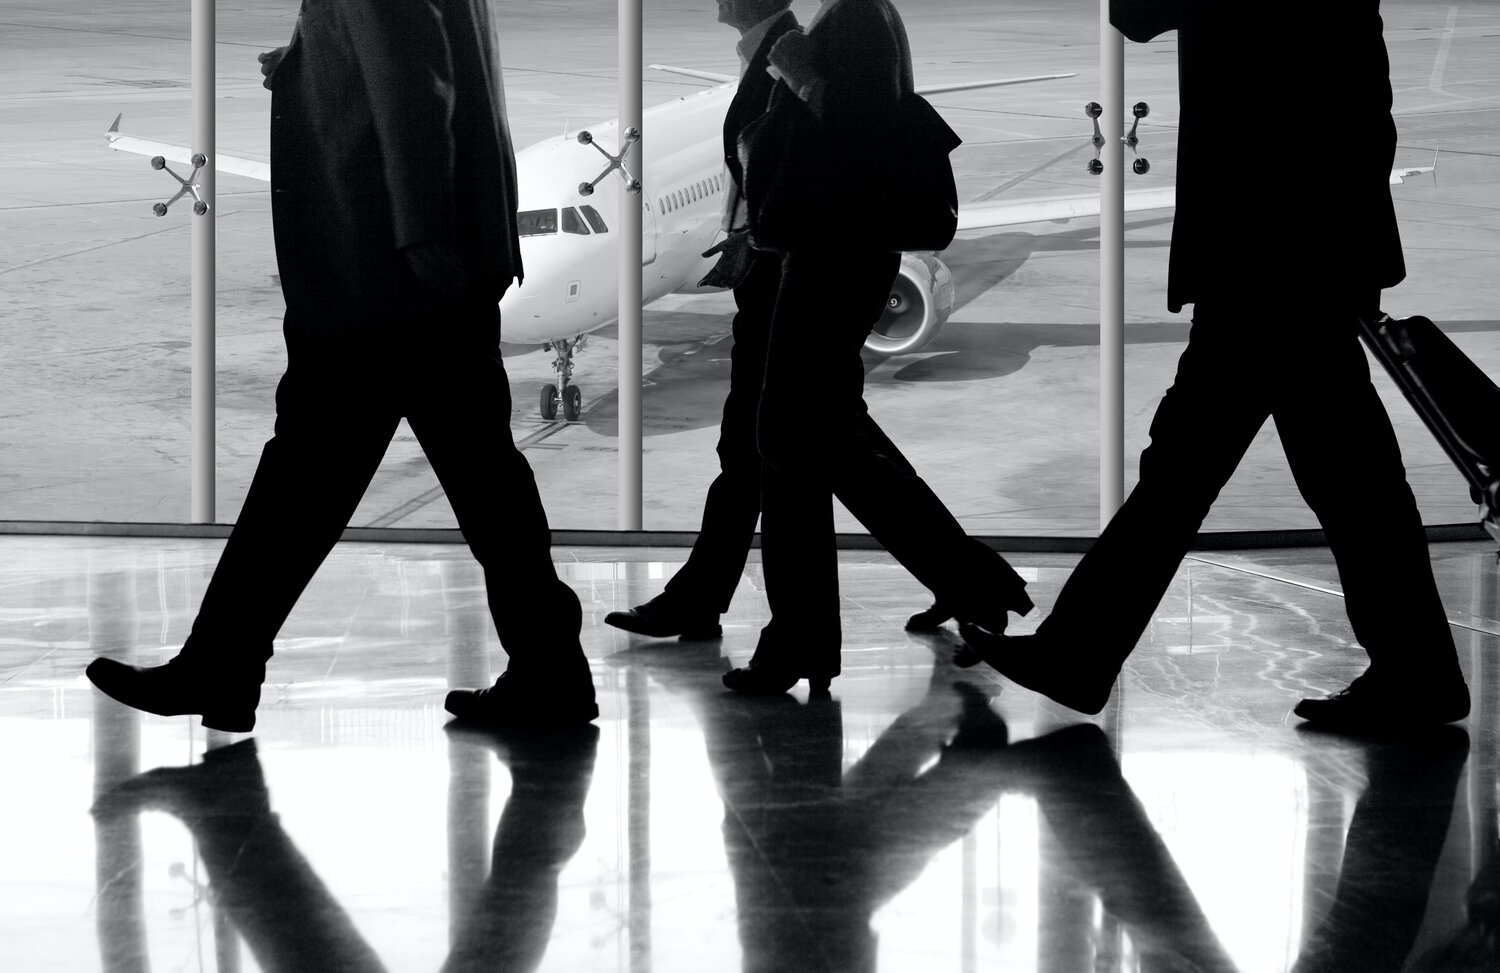 Black and white photo of men in business suits walking in an airport with a plane in the background.